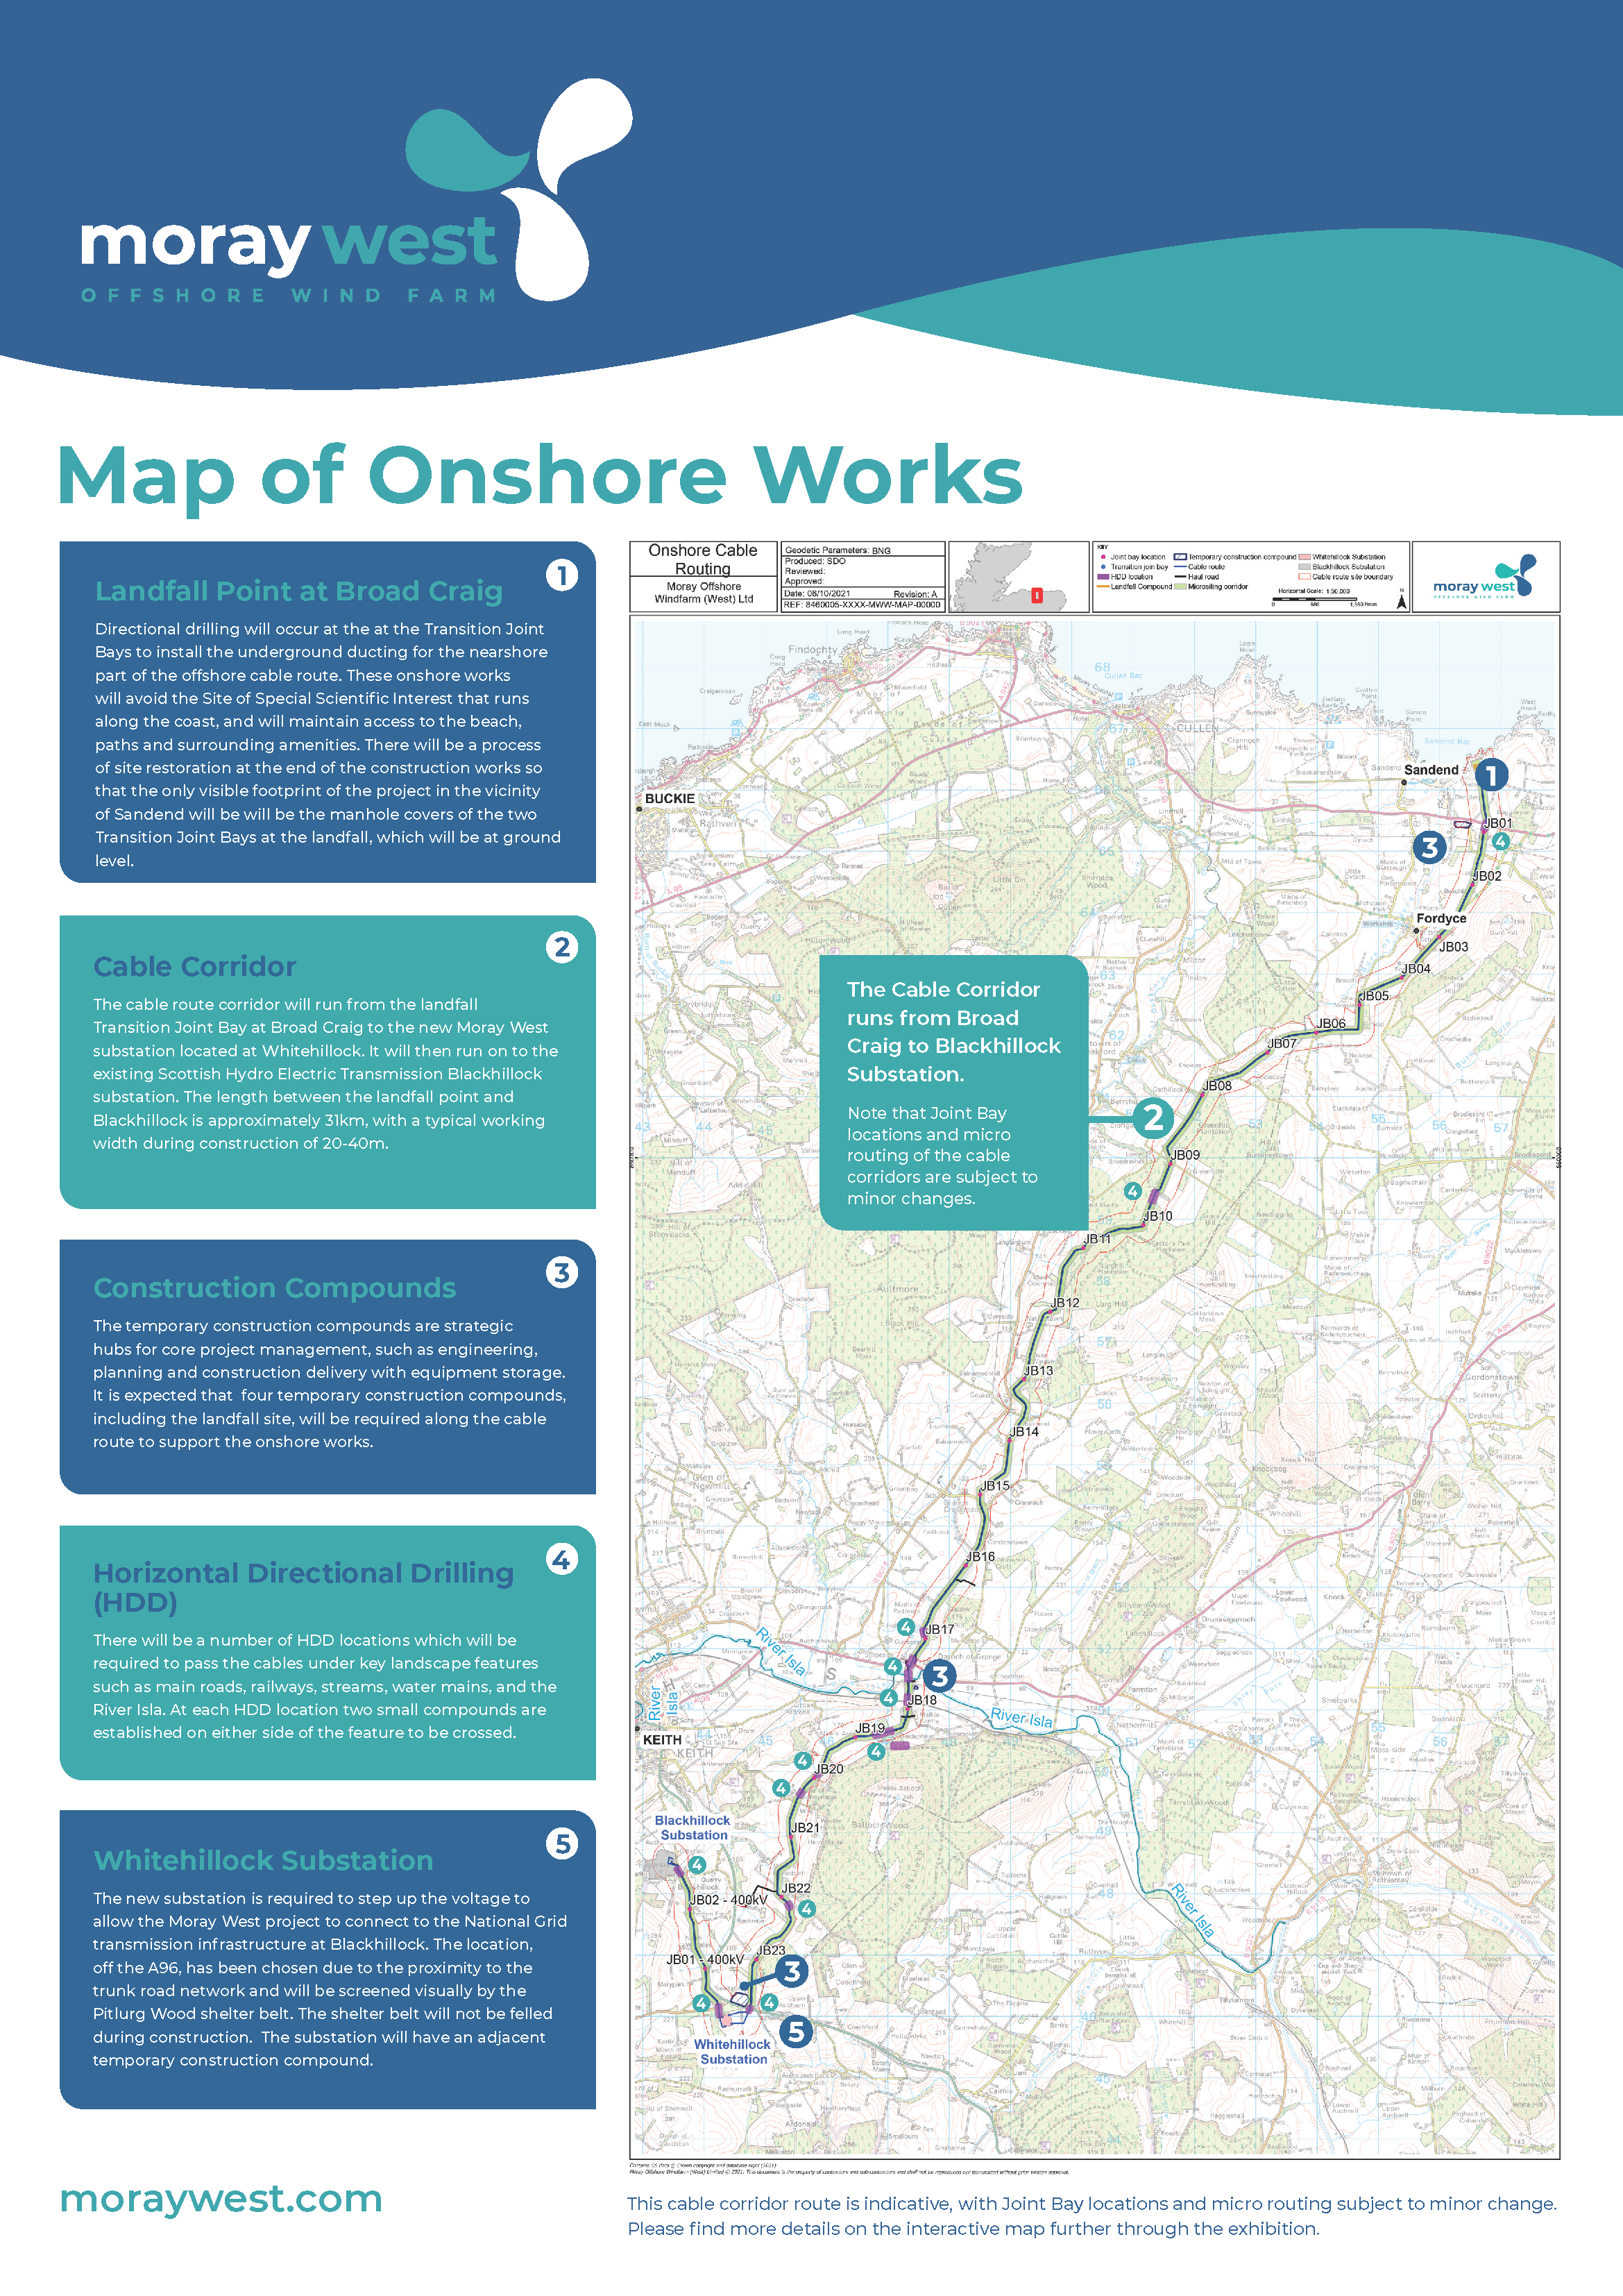 Map of onshore works